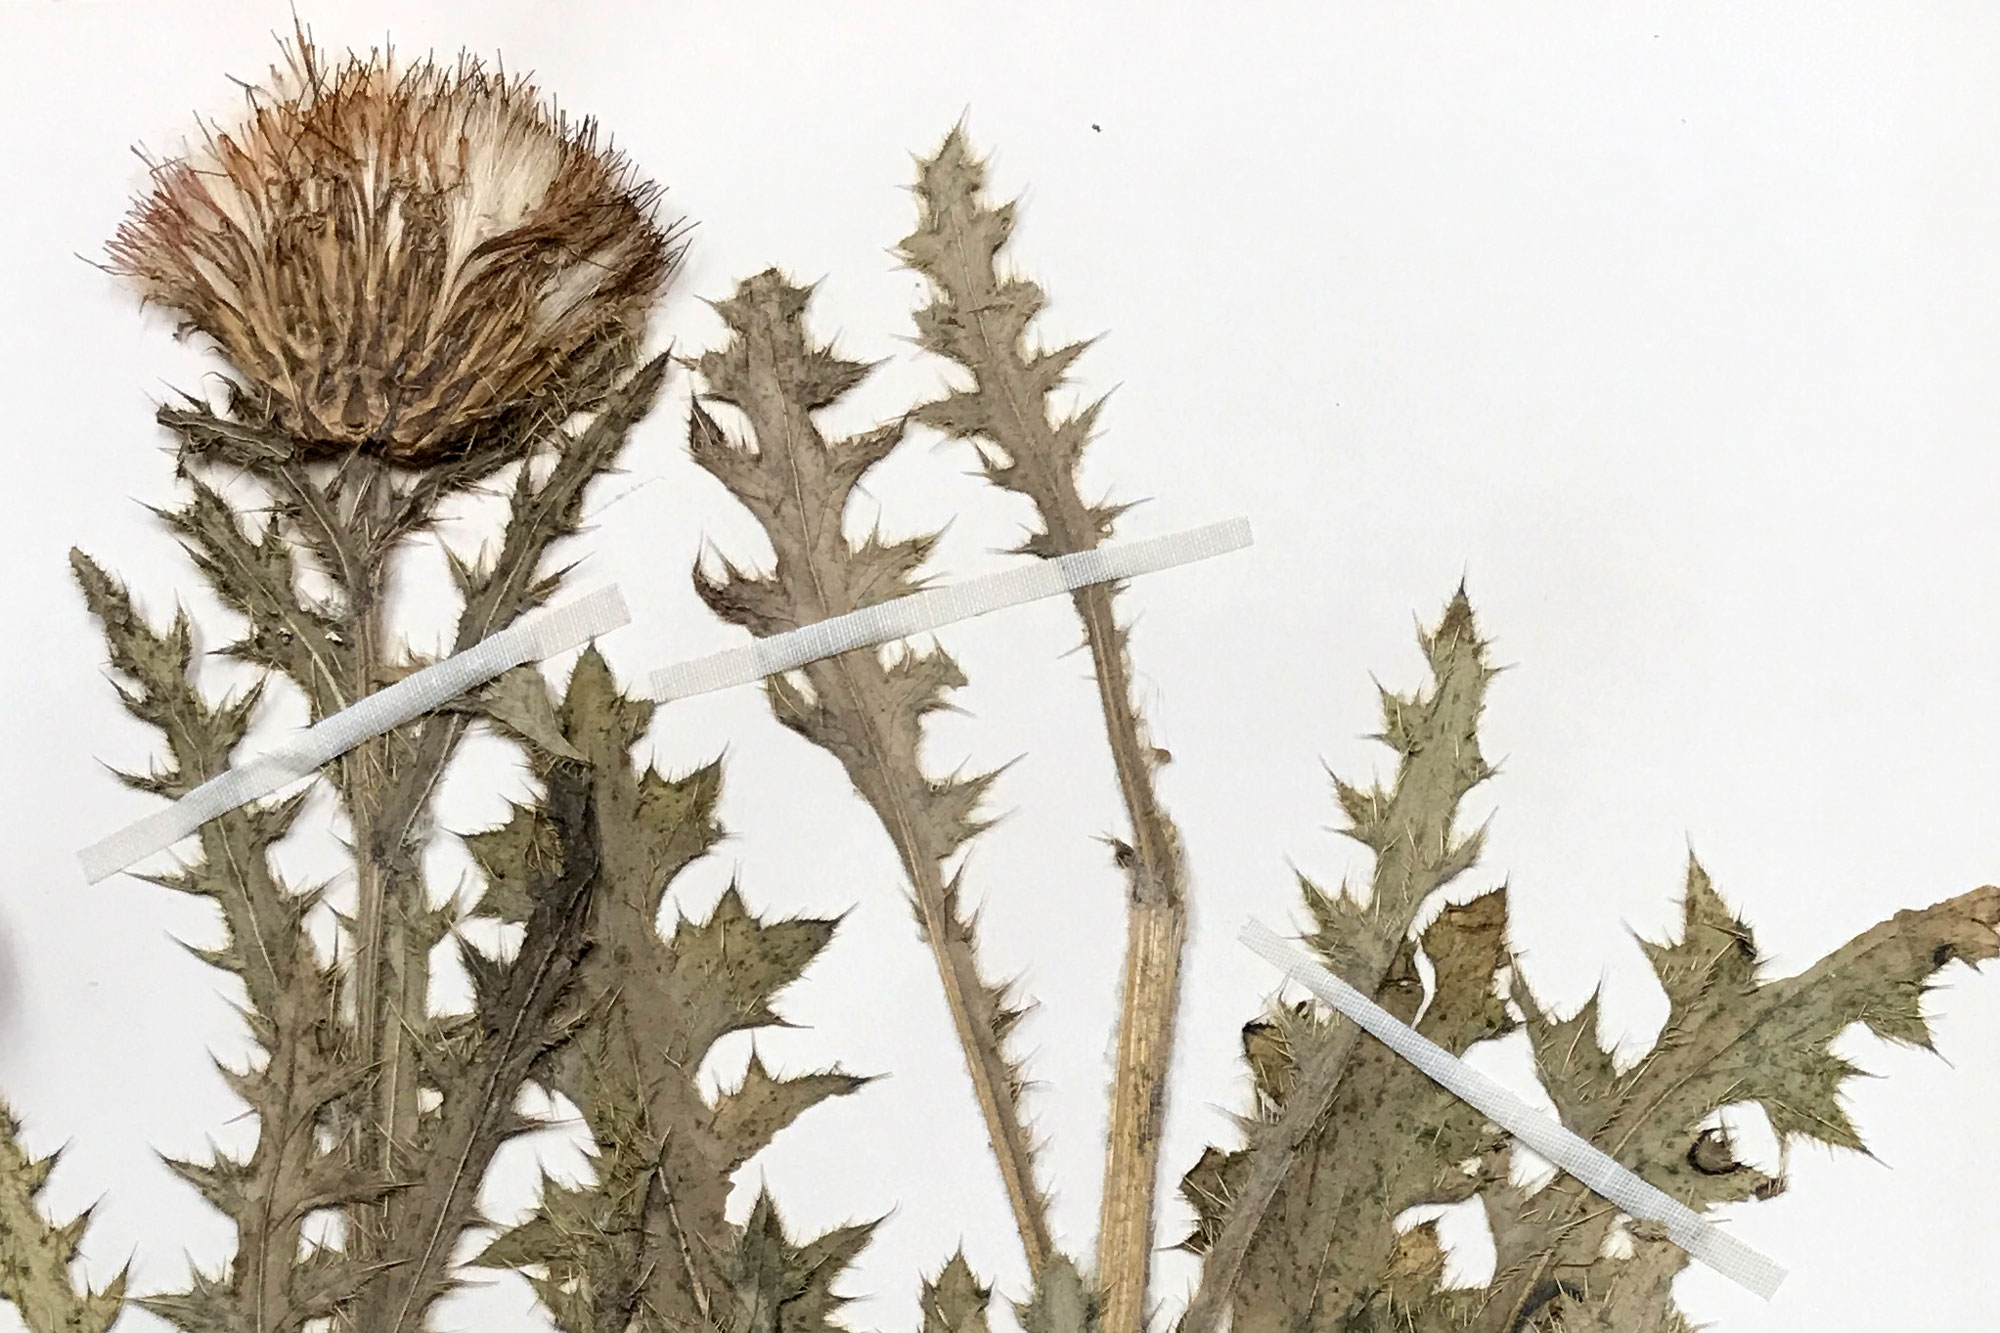 Dried prairie thistle plant specimen attached to paper.